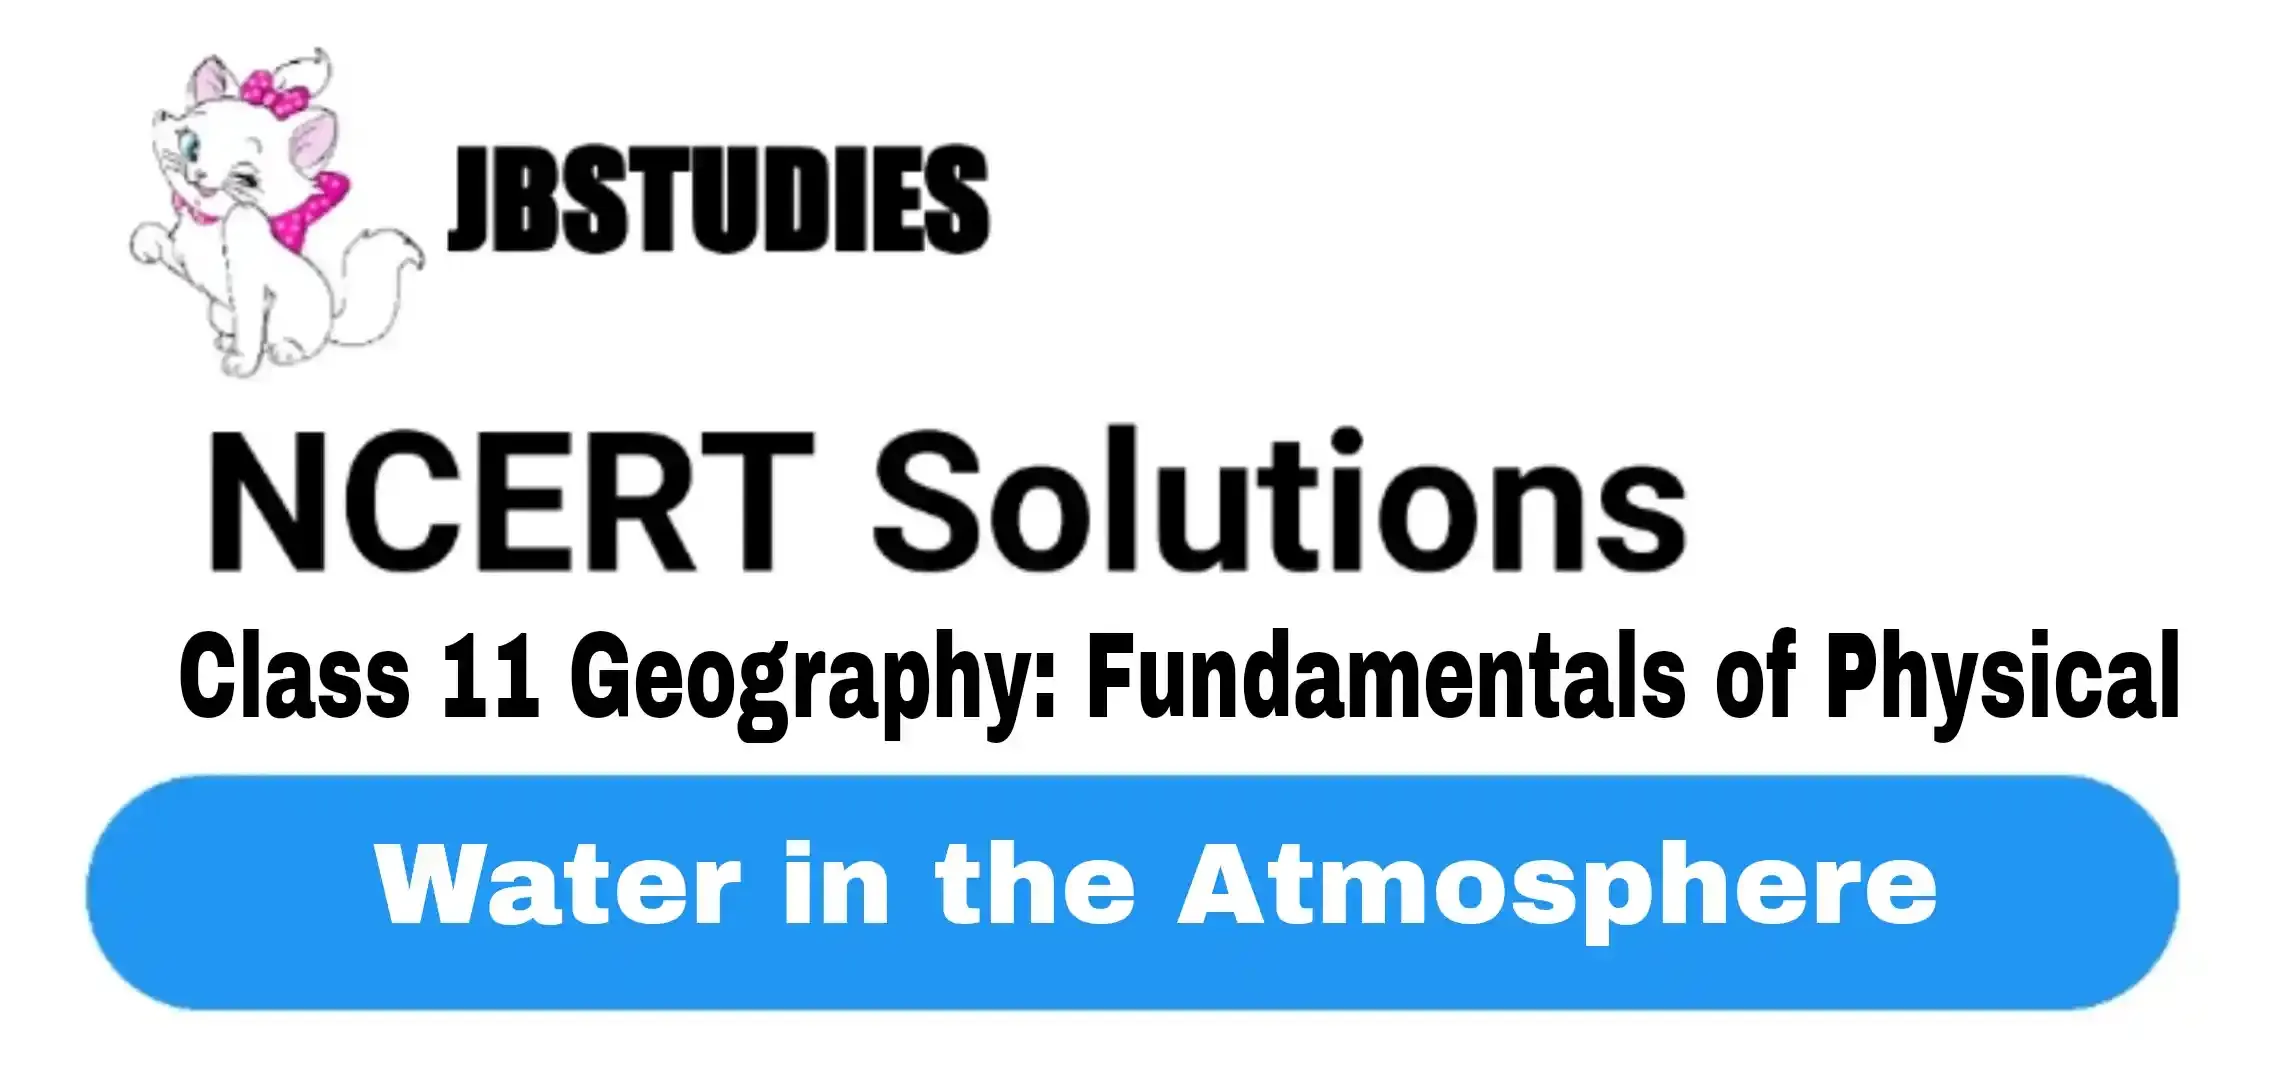 Solutions Class 11 Geography Chapter-11 Water in the Atmosphere